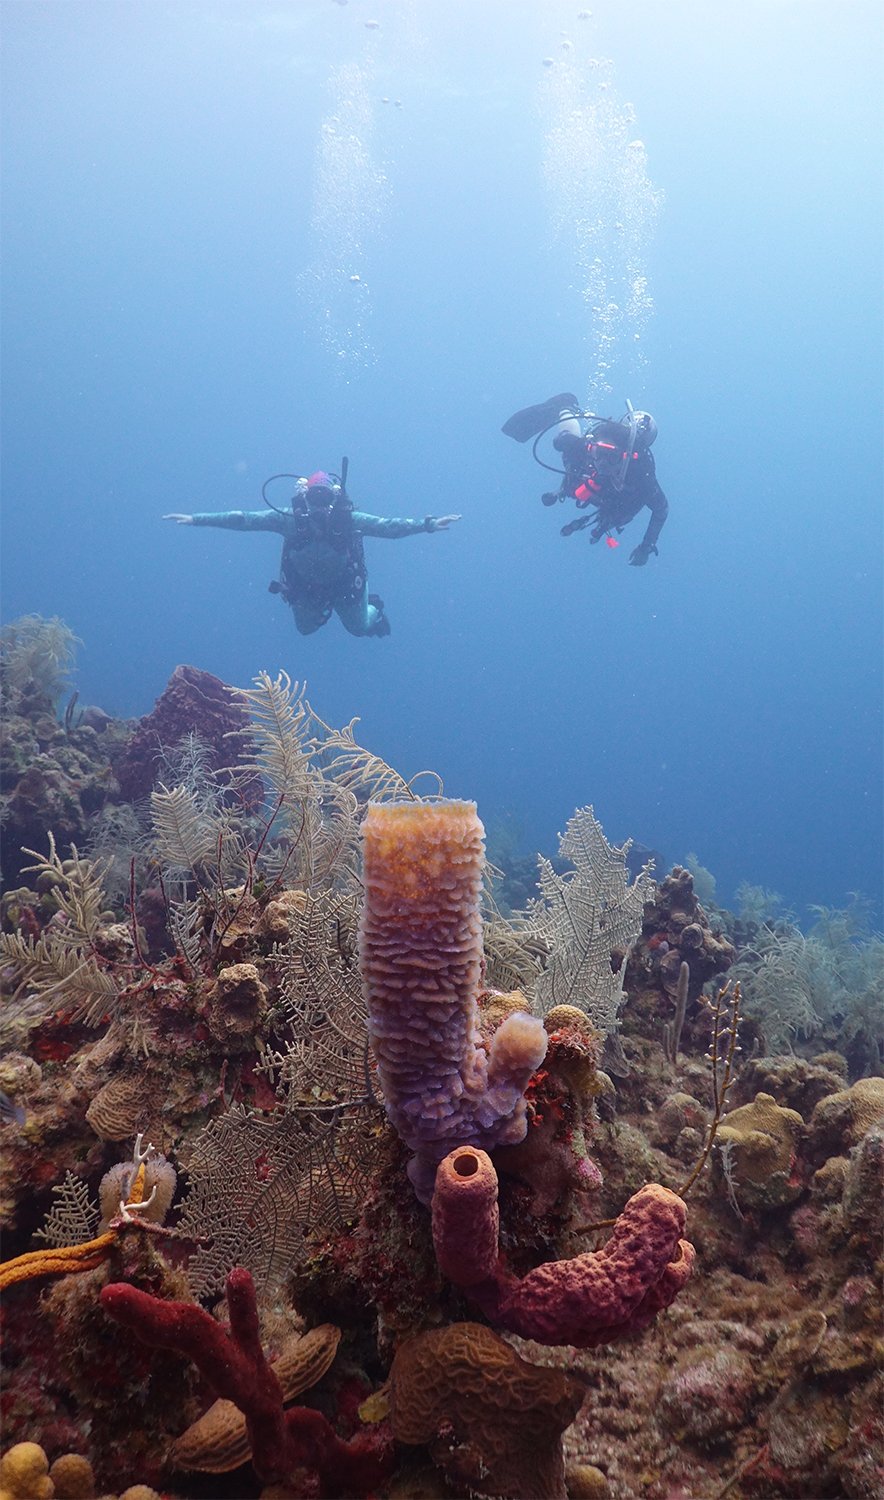  Scuba diving in Roatan, Honduras with my sister. Photo by resort photographer Orville. 